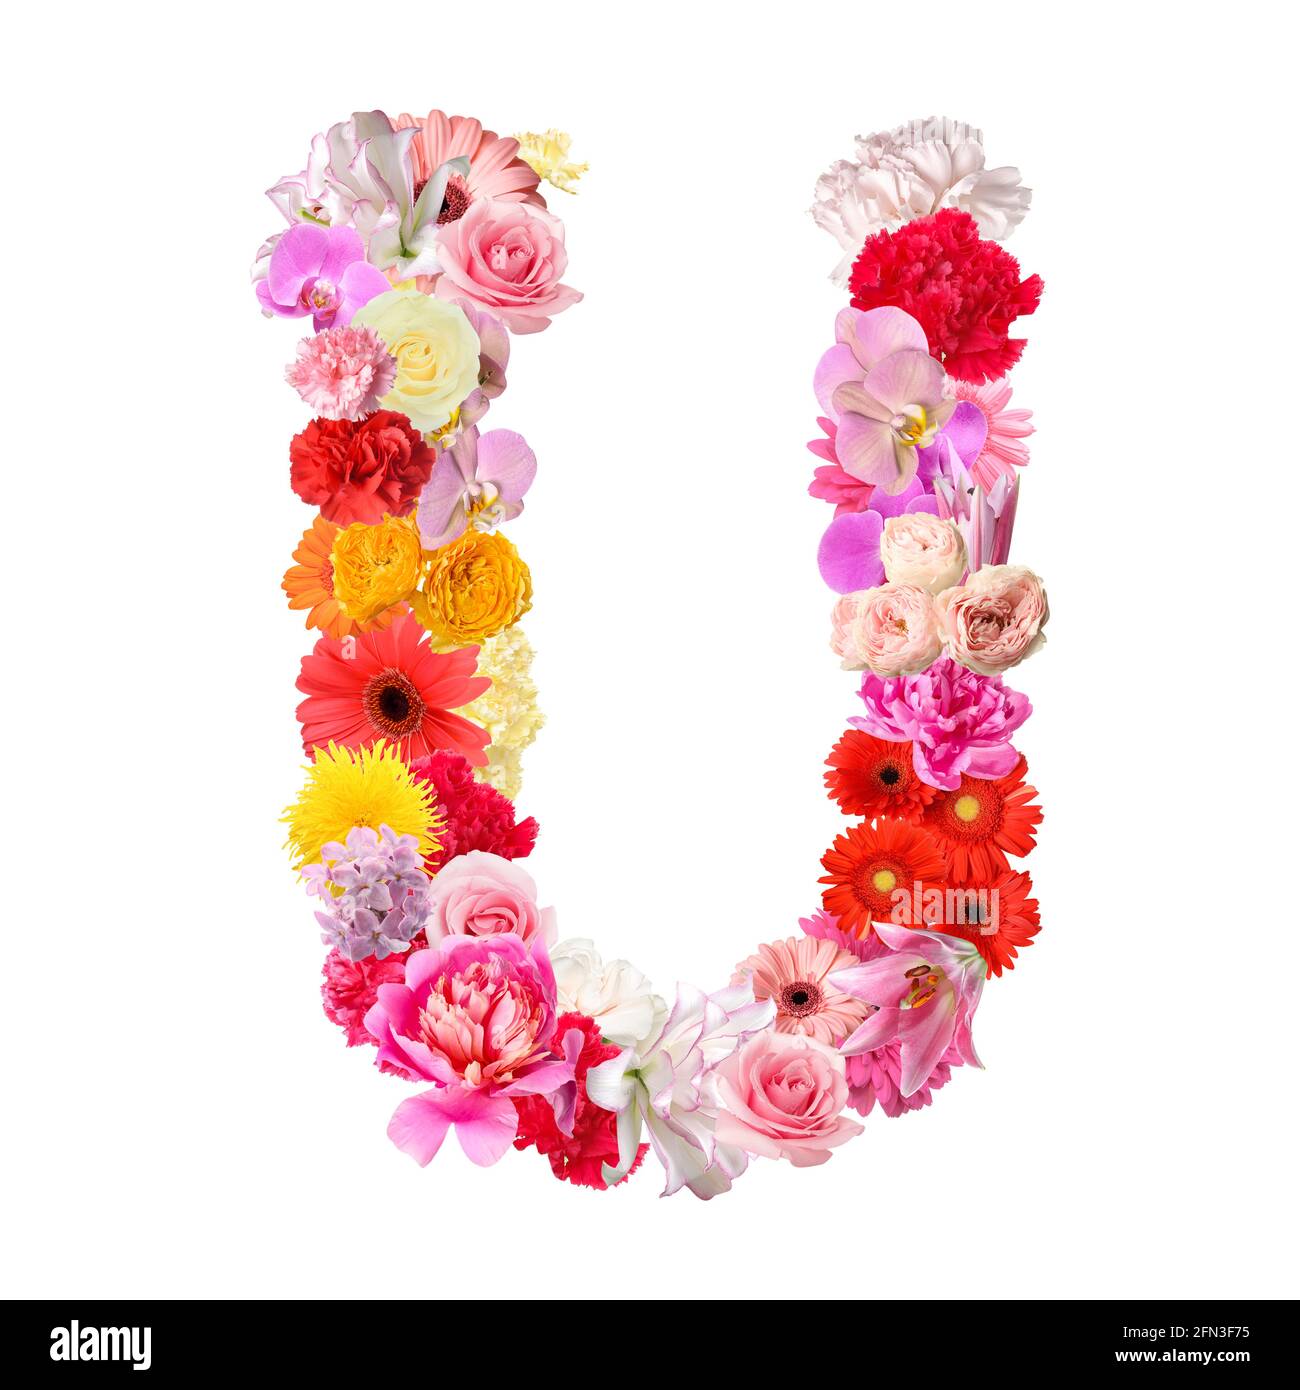 Letter U made of beautiful flowers on white background Stock Photo - Alamy